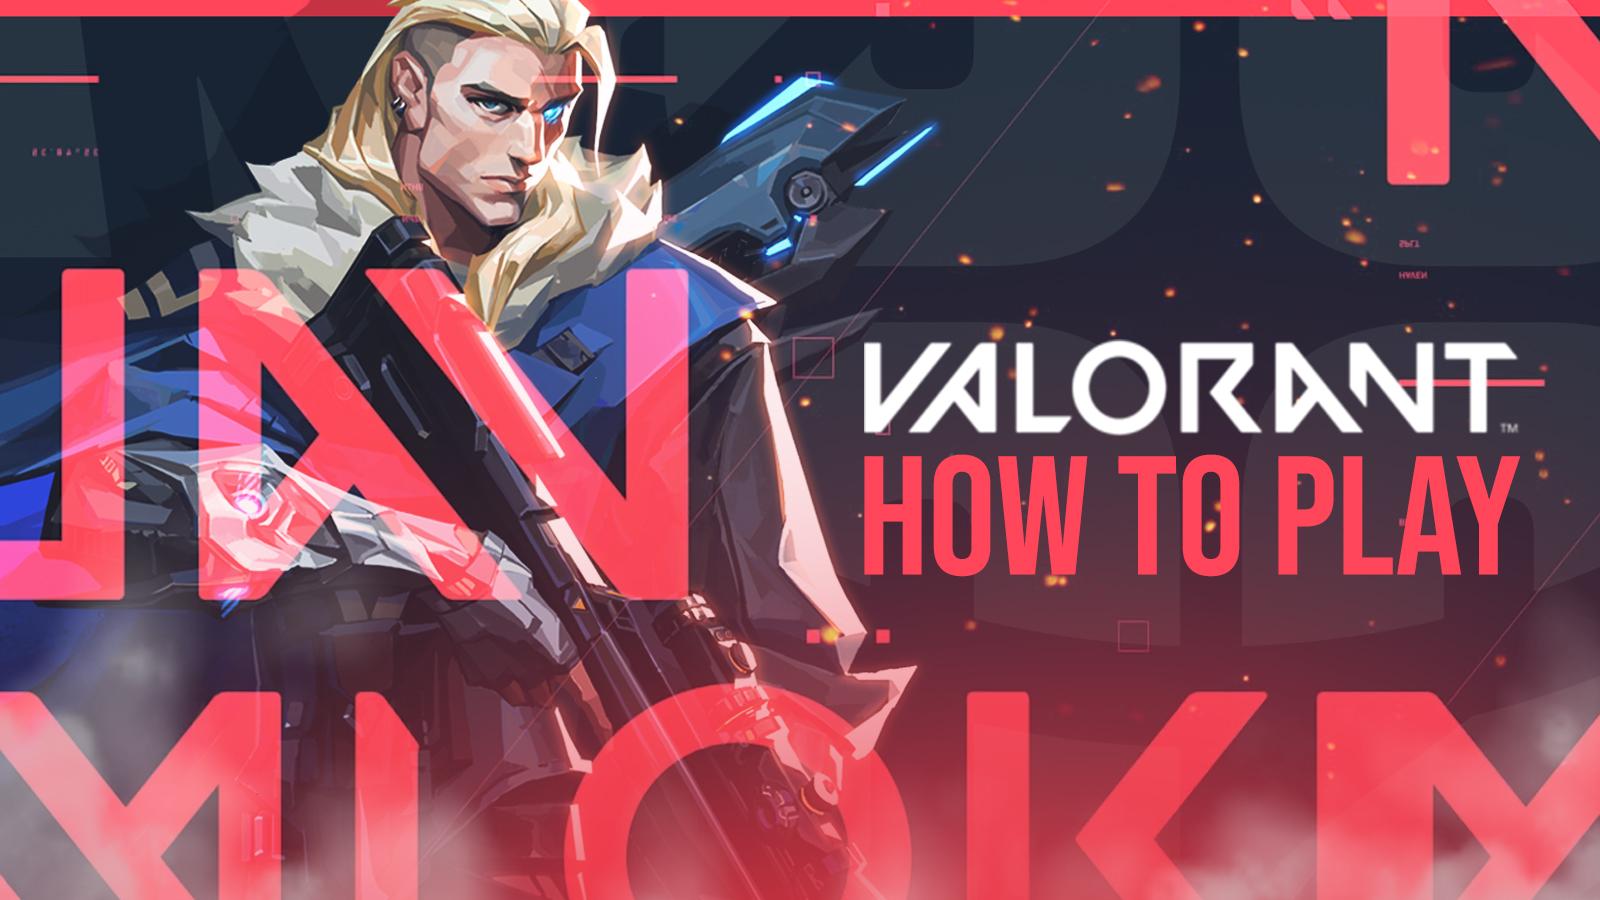 You Can Play Riot's New Shooter 'Valorant' In A Closed Beta Next Week